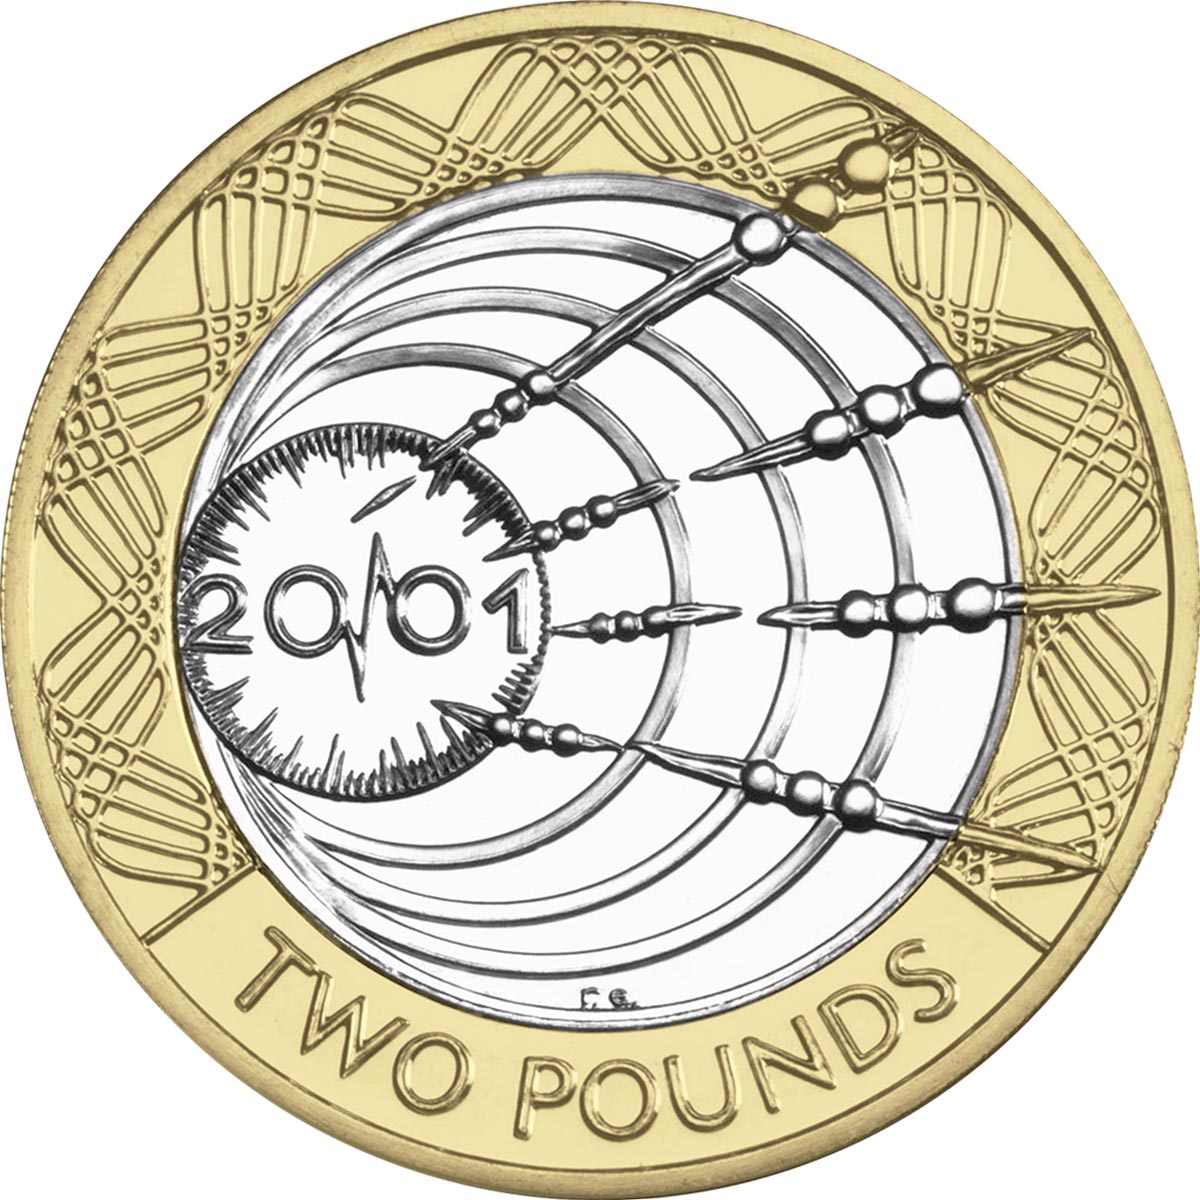 Image of 2 pounds coin - Transatlantic radio centenary | United Kingdom 2001.  The Bimetal: CuNi, nordic gold coin is of Proof, BU, UNC quality.